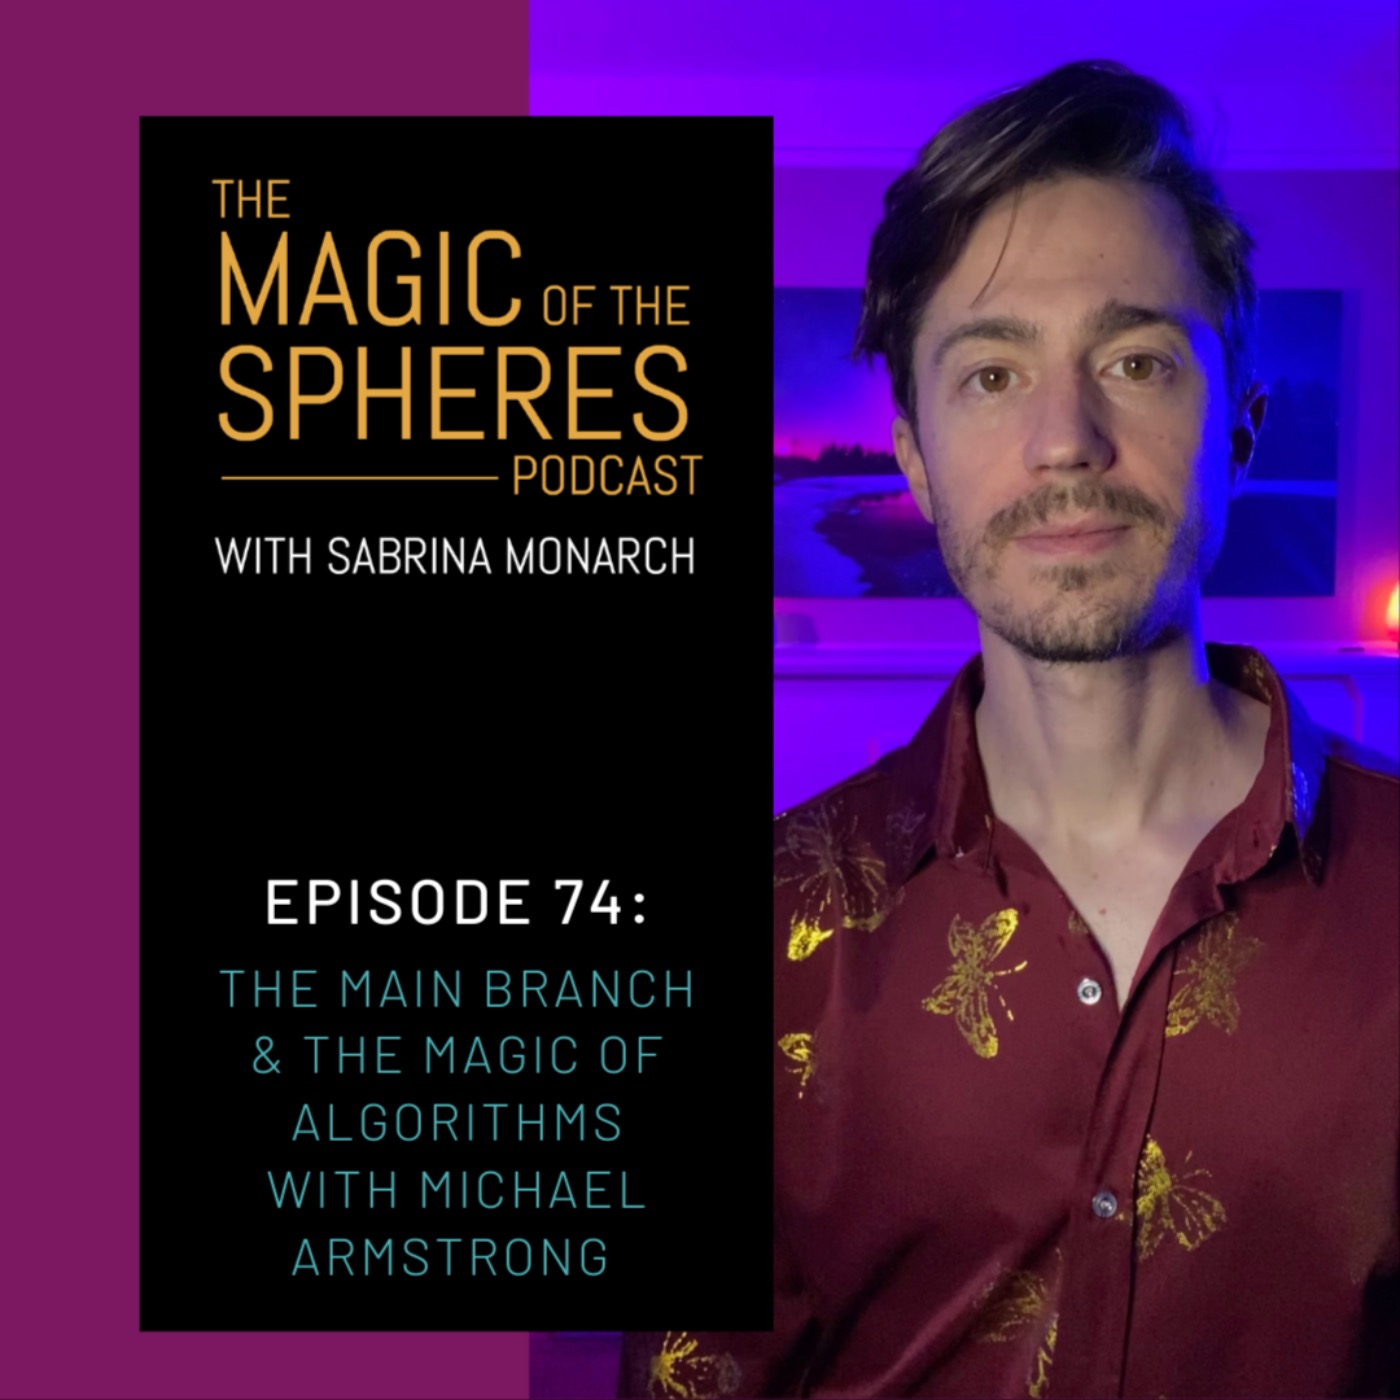 The Main Branch & the Magic of Algorithms with Michael Armstrong